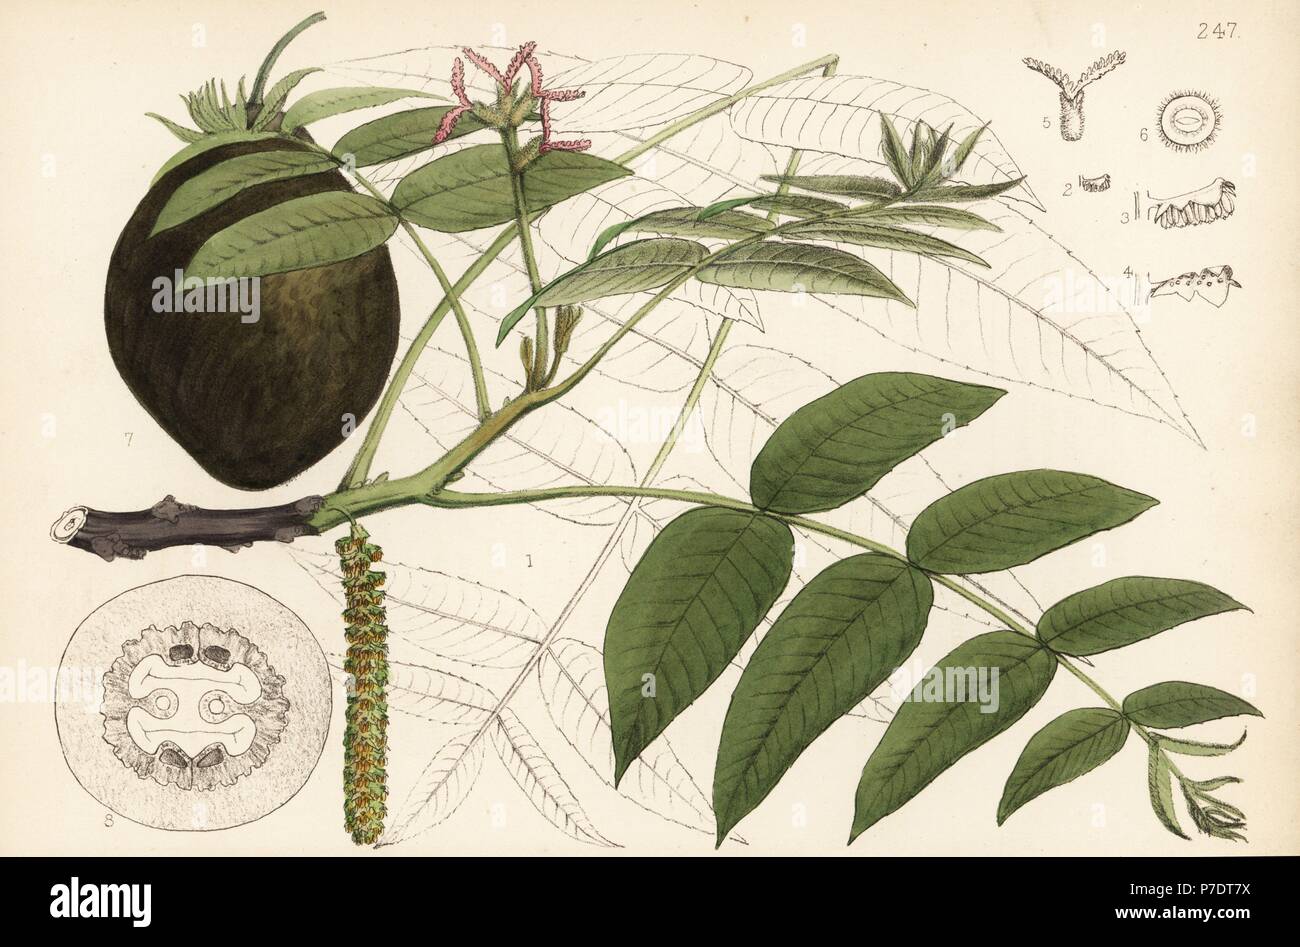 Butternut, white walnut or oil-nut, Juglans cinerea. Handcoloured lithograph by Hanhart after a botanical illustration by David Blair from Robert Bentley and Henry Trimen's Medicinal Plants, London, 1880. Stock Photo